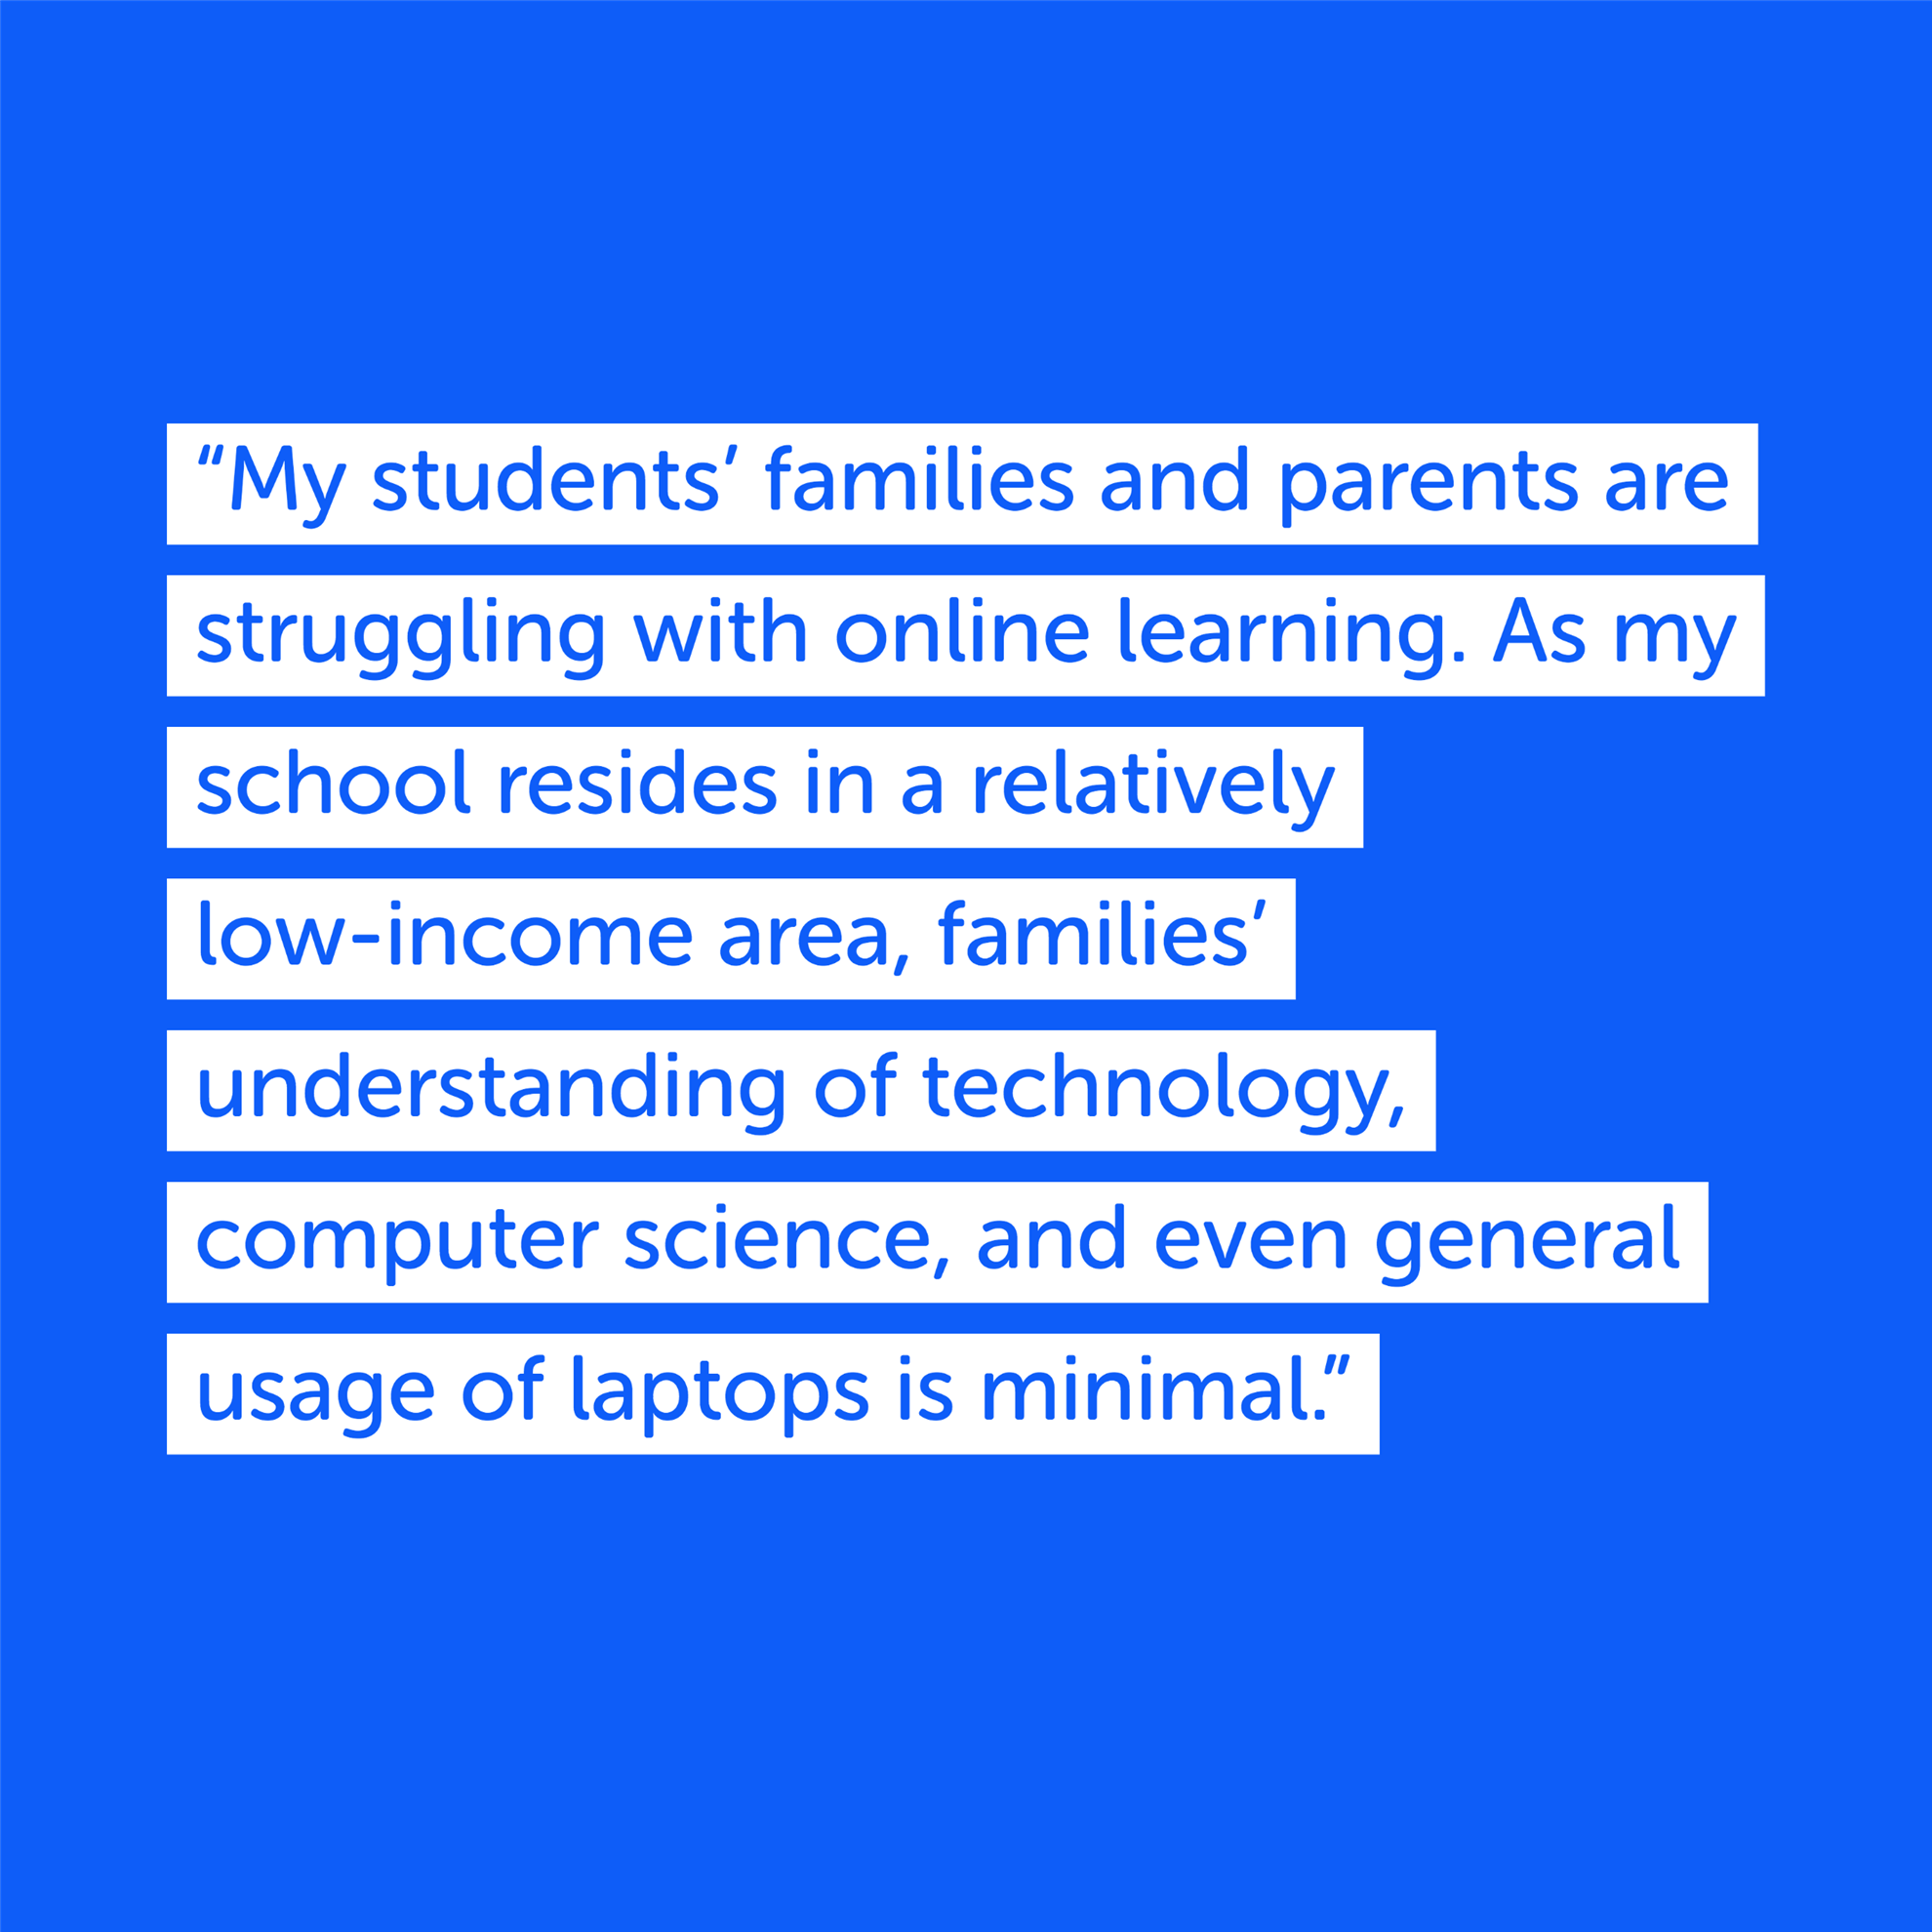 "My students' families and parents are struggling with online learning. As my school resides in a relatively low-income area, families' understanding of technology. computer science, ,and even general usage of laptops is minimal."

Quote from Carla Neely